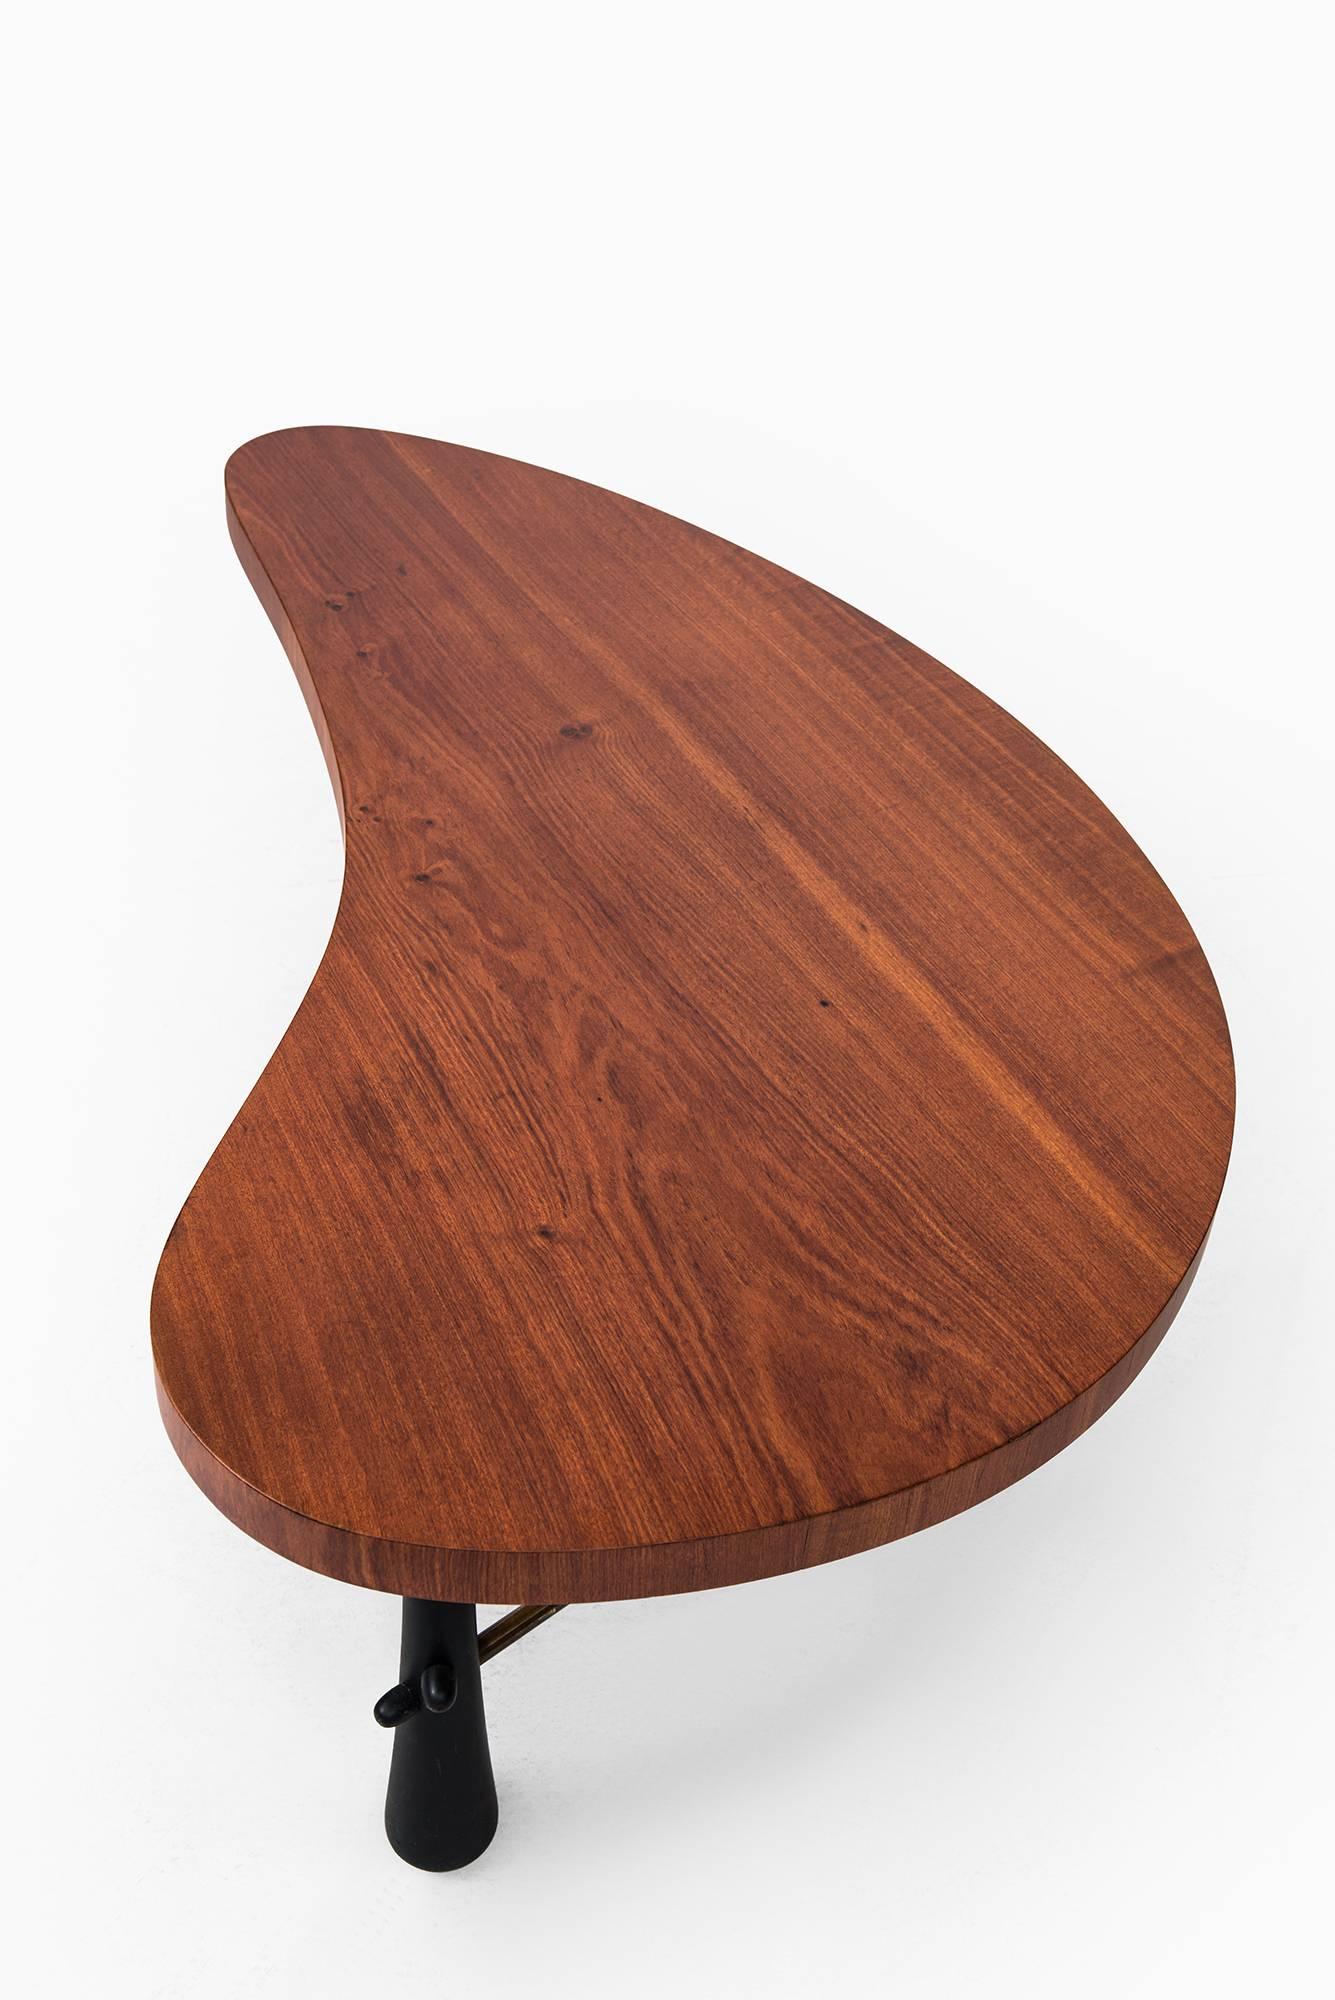 Mid-20th Century Rare Kidney-Shaped Coffee Table Produced in Sweden